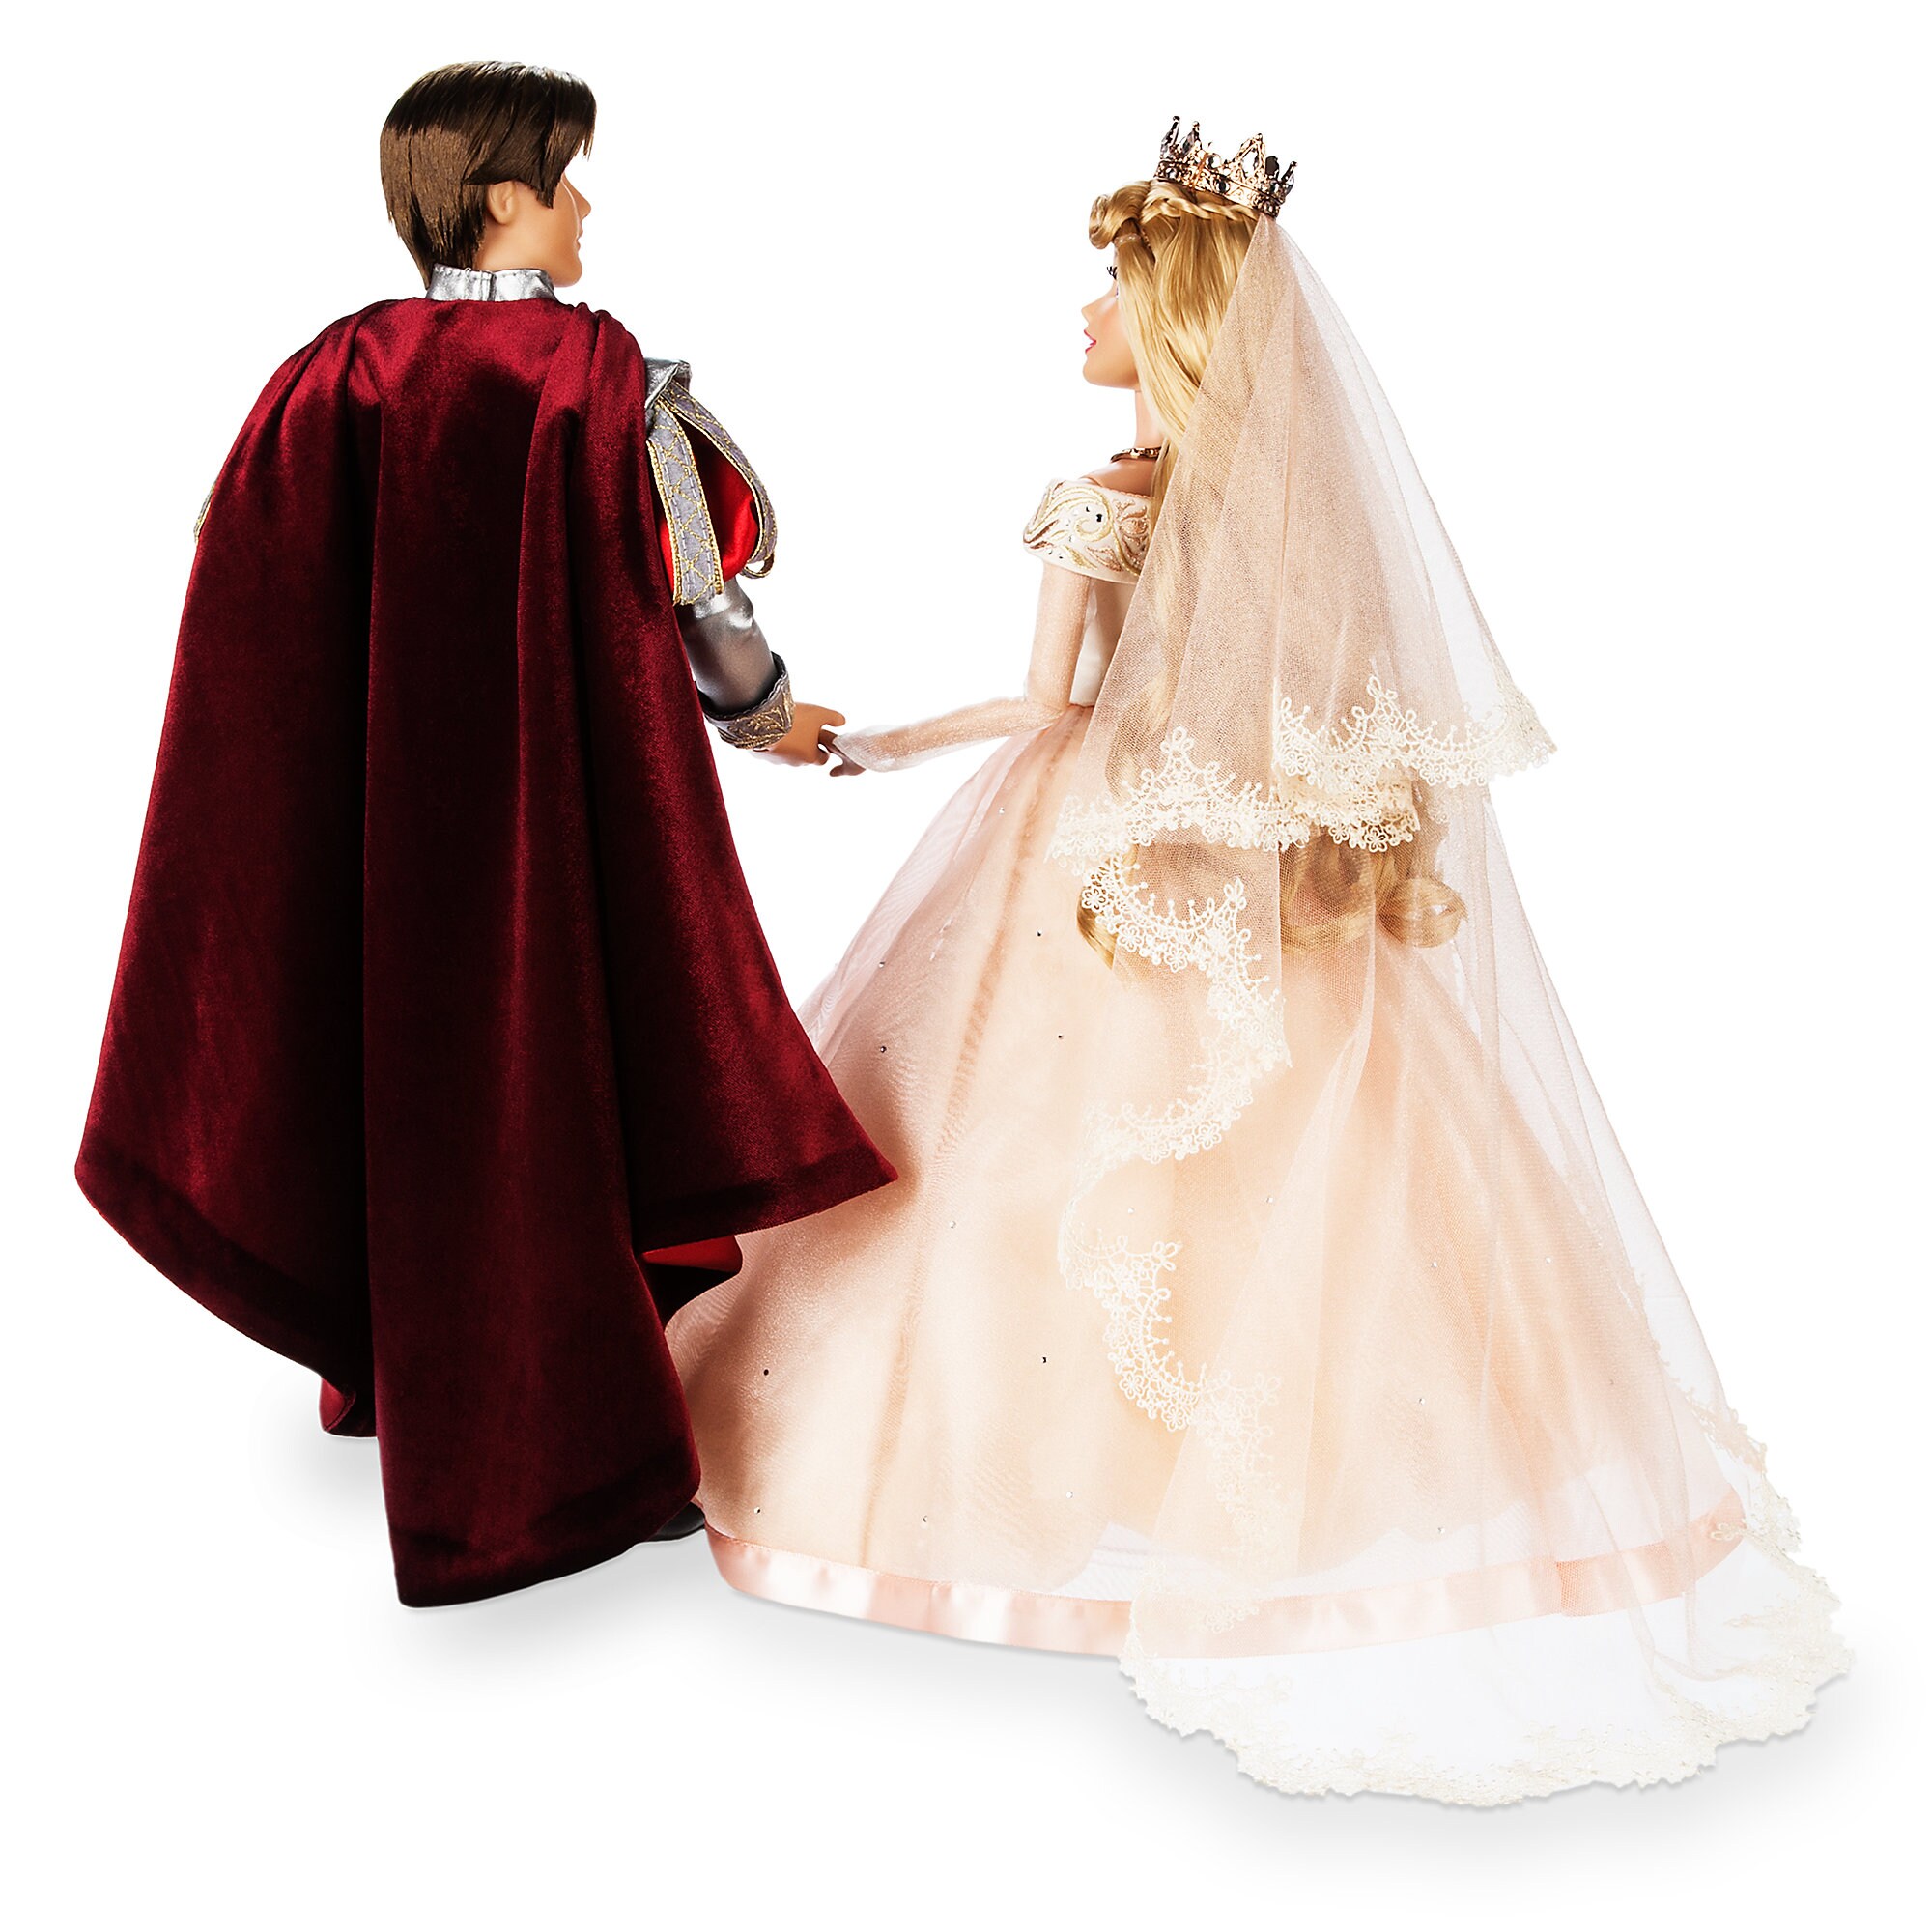 Aurora and Prince Phillip Limited Edition Wedding Doll Set - Sleeping Beauty 60th Anniversary - 17''